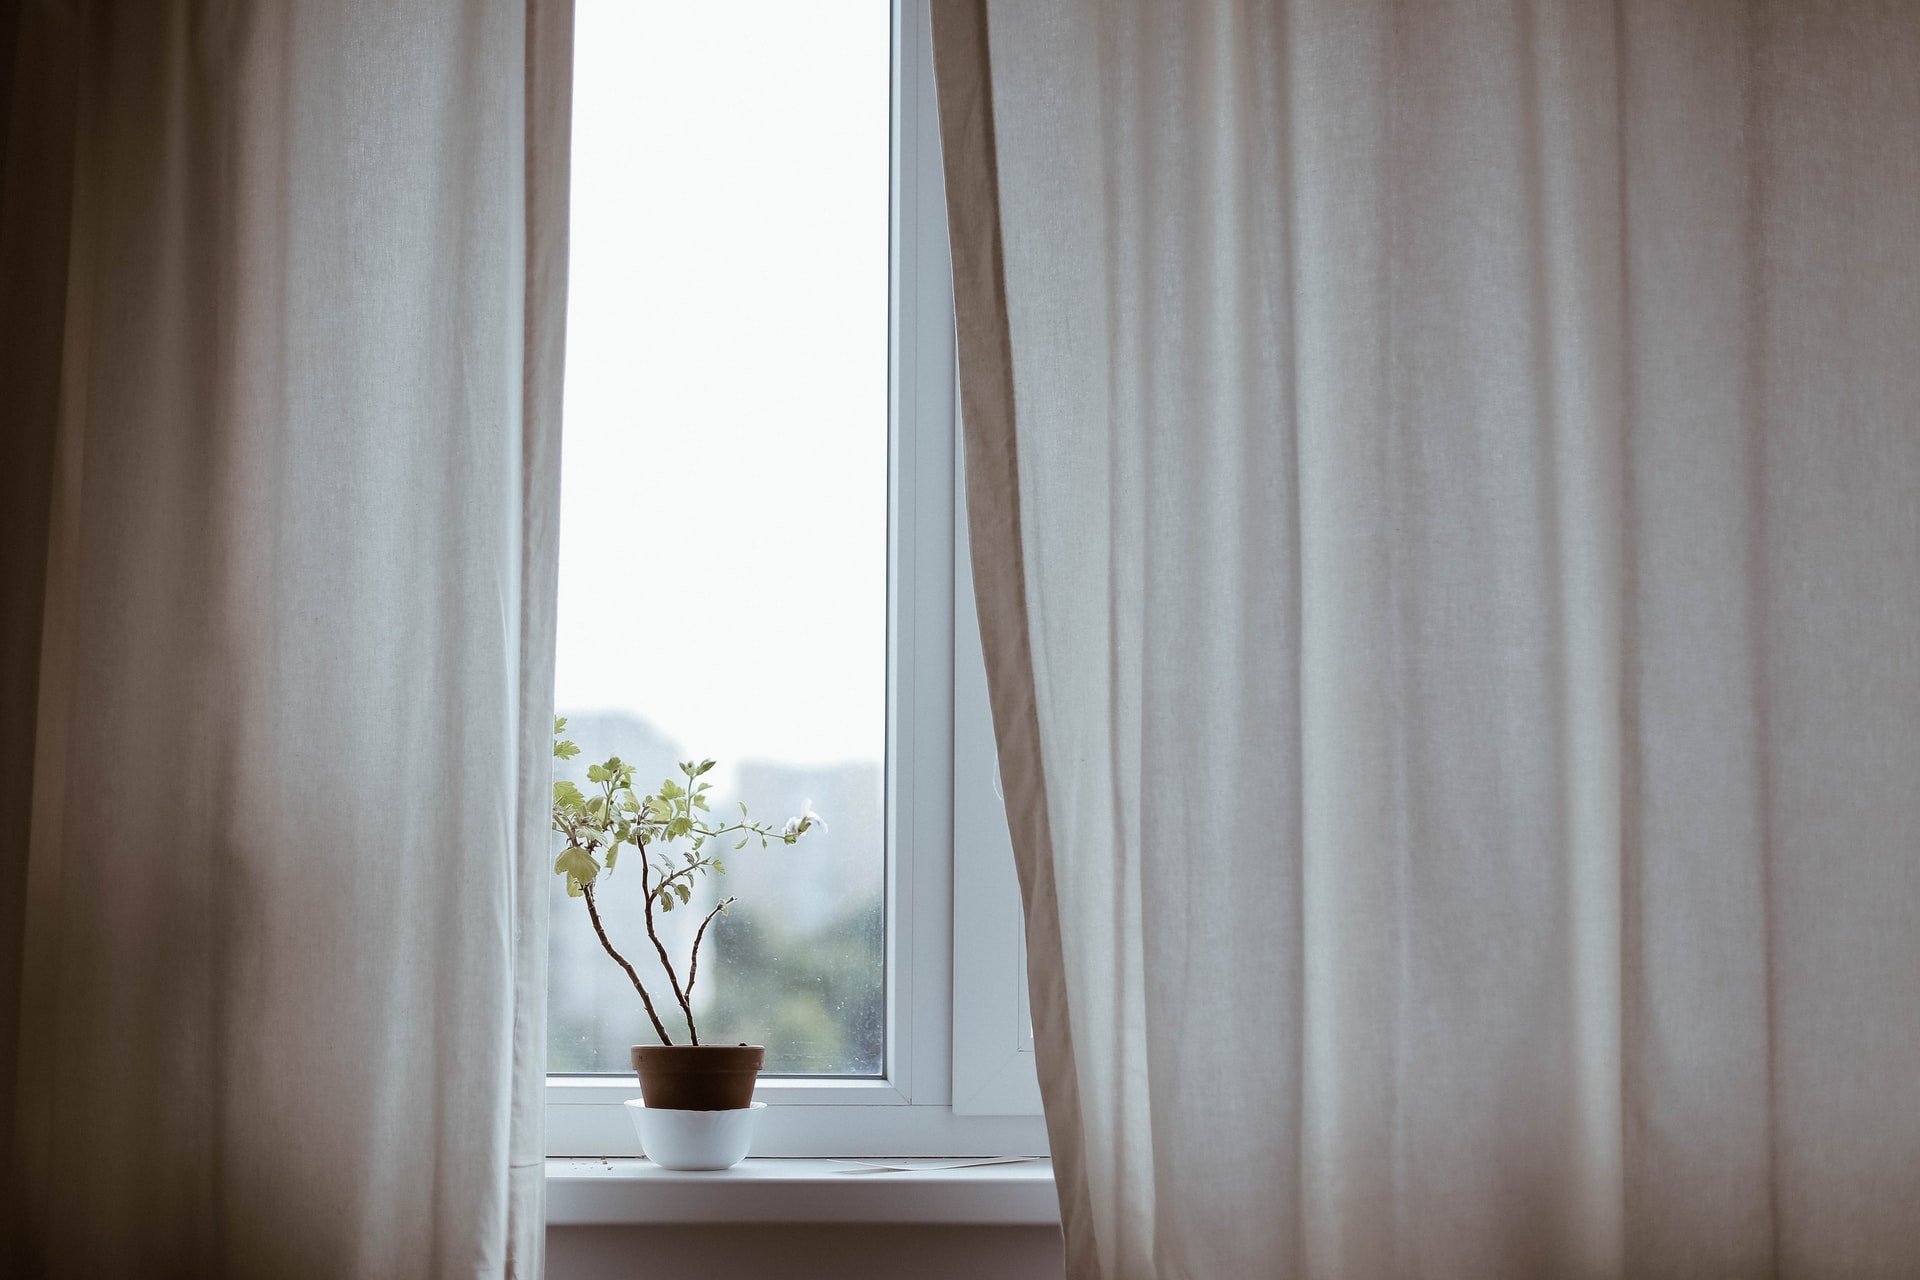 This is particularly important for south-facing rooms, where having the sun streaming through your windows will transform your surroundings into a greenhouse. As a general rule, windows should be kept closed when it is cooler indoors than out, usually when the day is at its hottest, but opened once the daytime temperature drops in the evening and overnight.